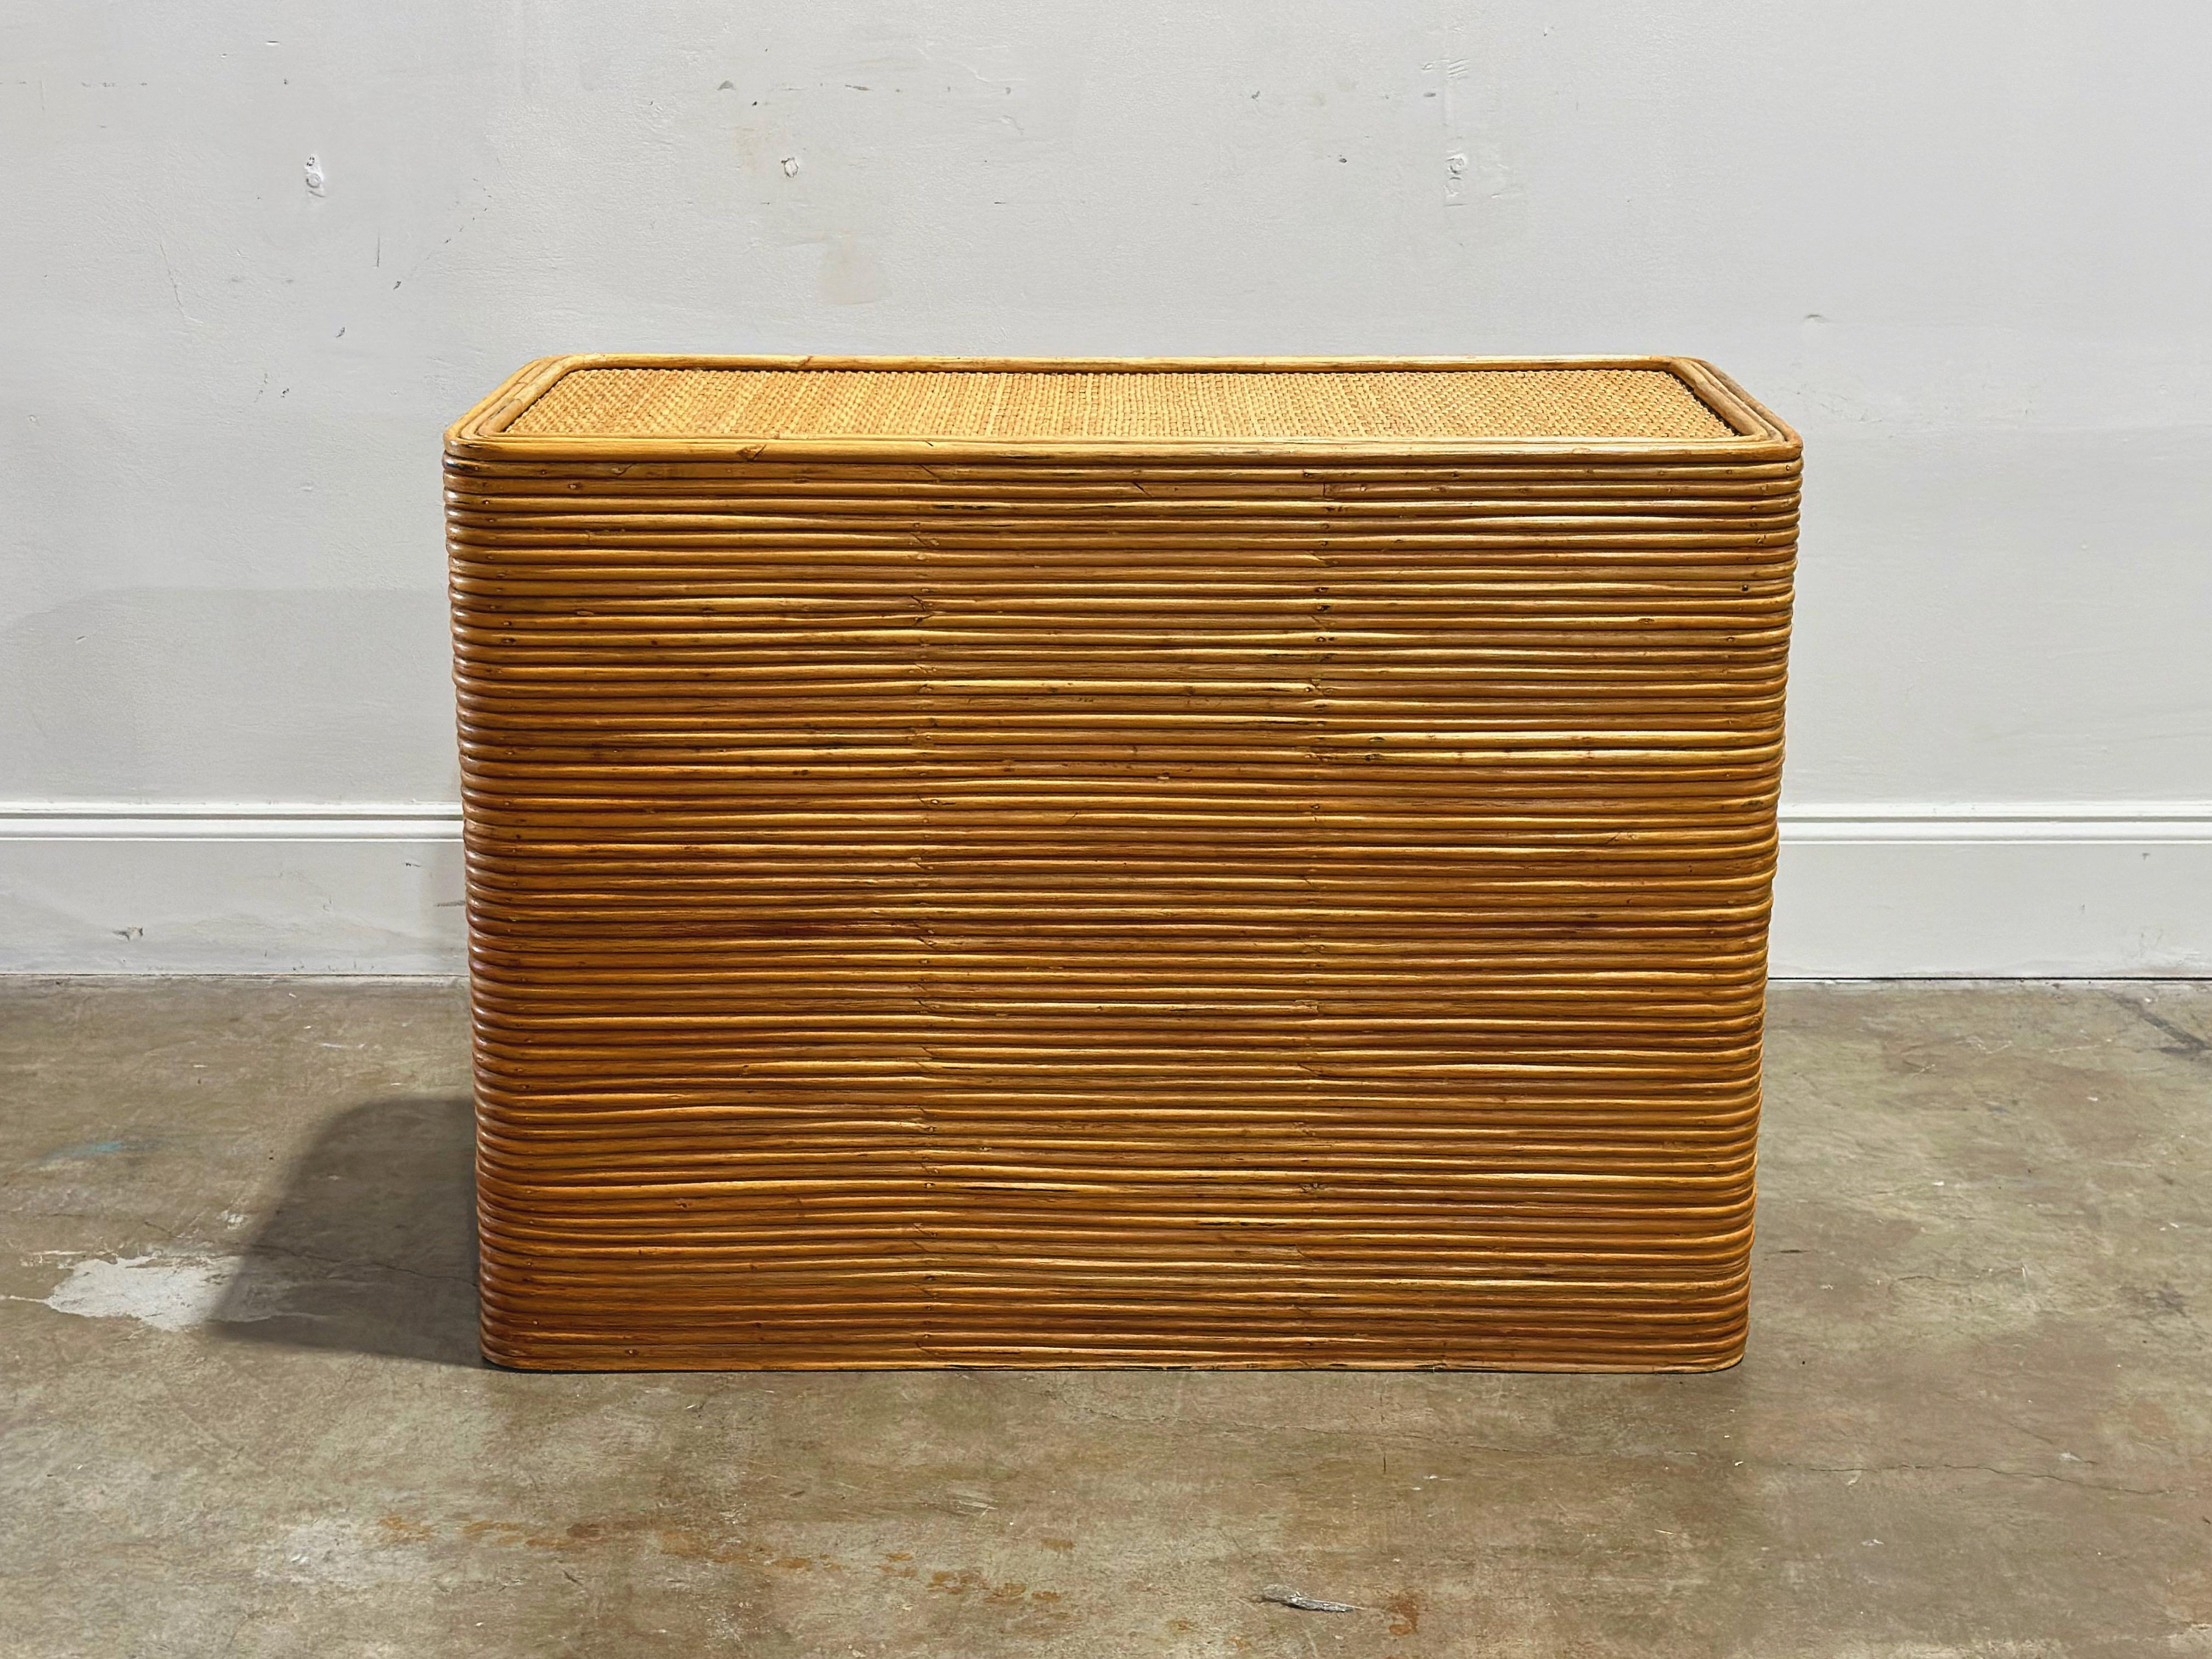 Vintage French Rattan Console Table - Stacked Reed - Organic Modern In Good Condition For Sale In Decatur, GA